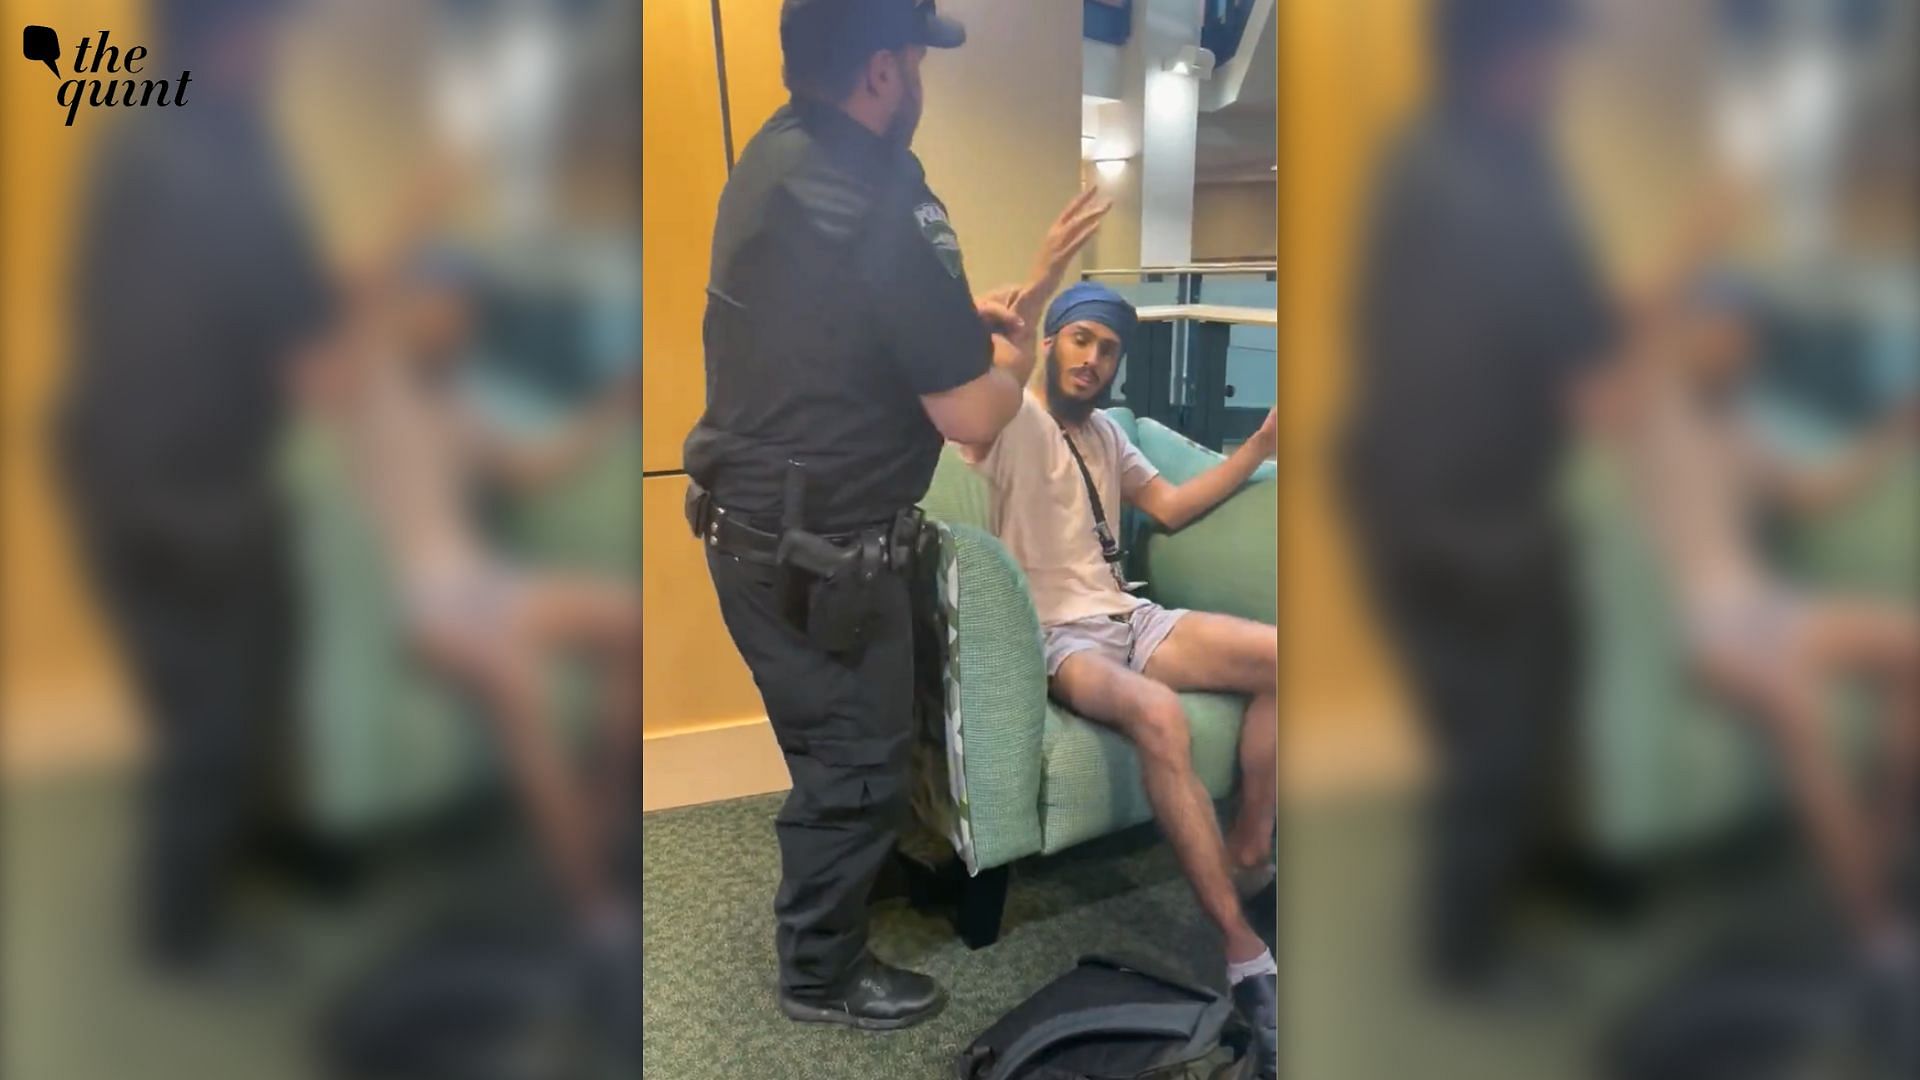 <div class="paragraphs"><p>The student is then heard offering to "take the whole thing off" but is instead handcuffed by the police officer.</p></div>